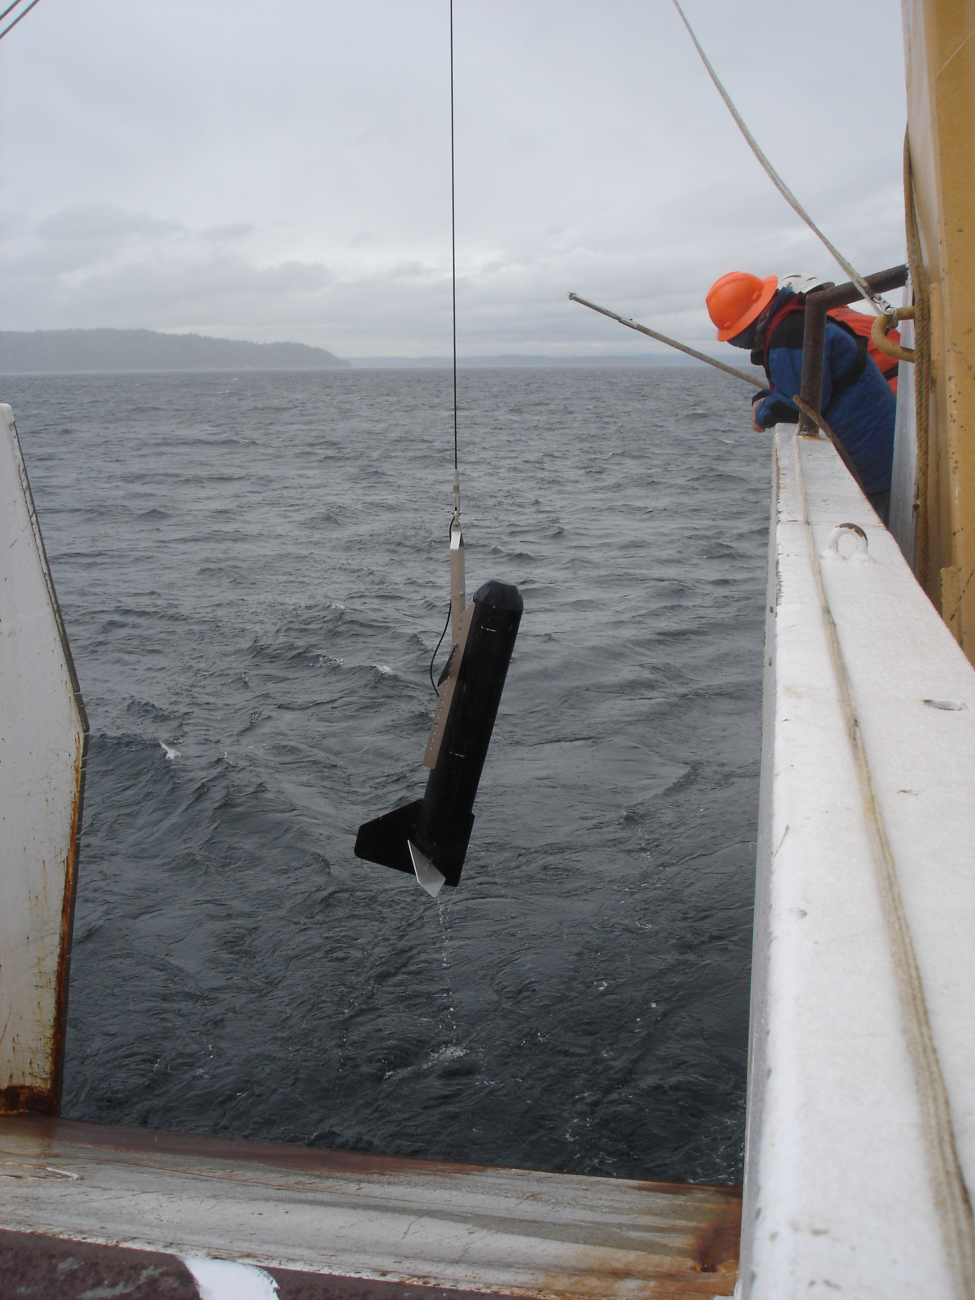 Towed fish being recovered - perhaps a sound velocity sensor or online CTD